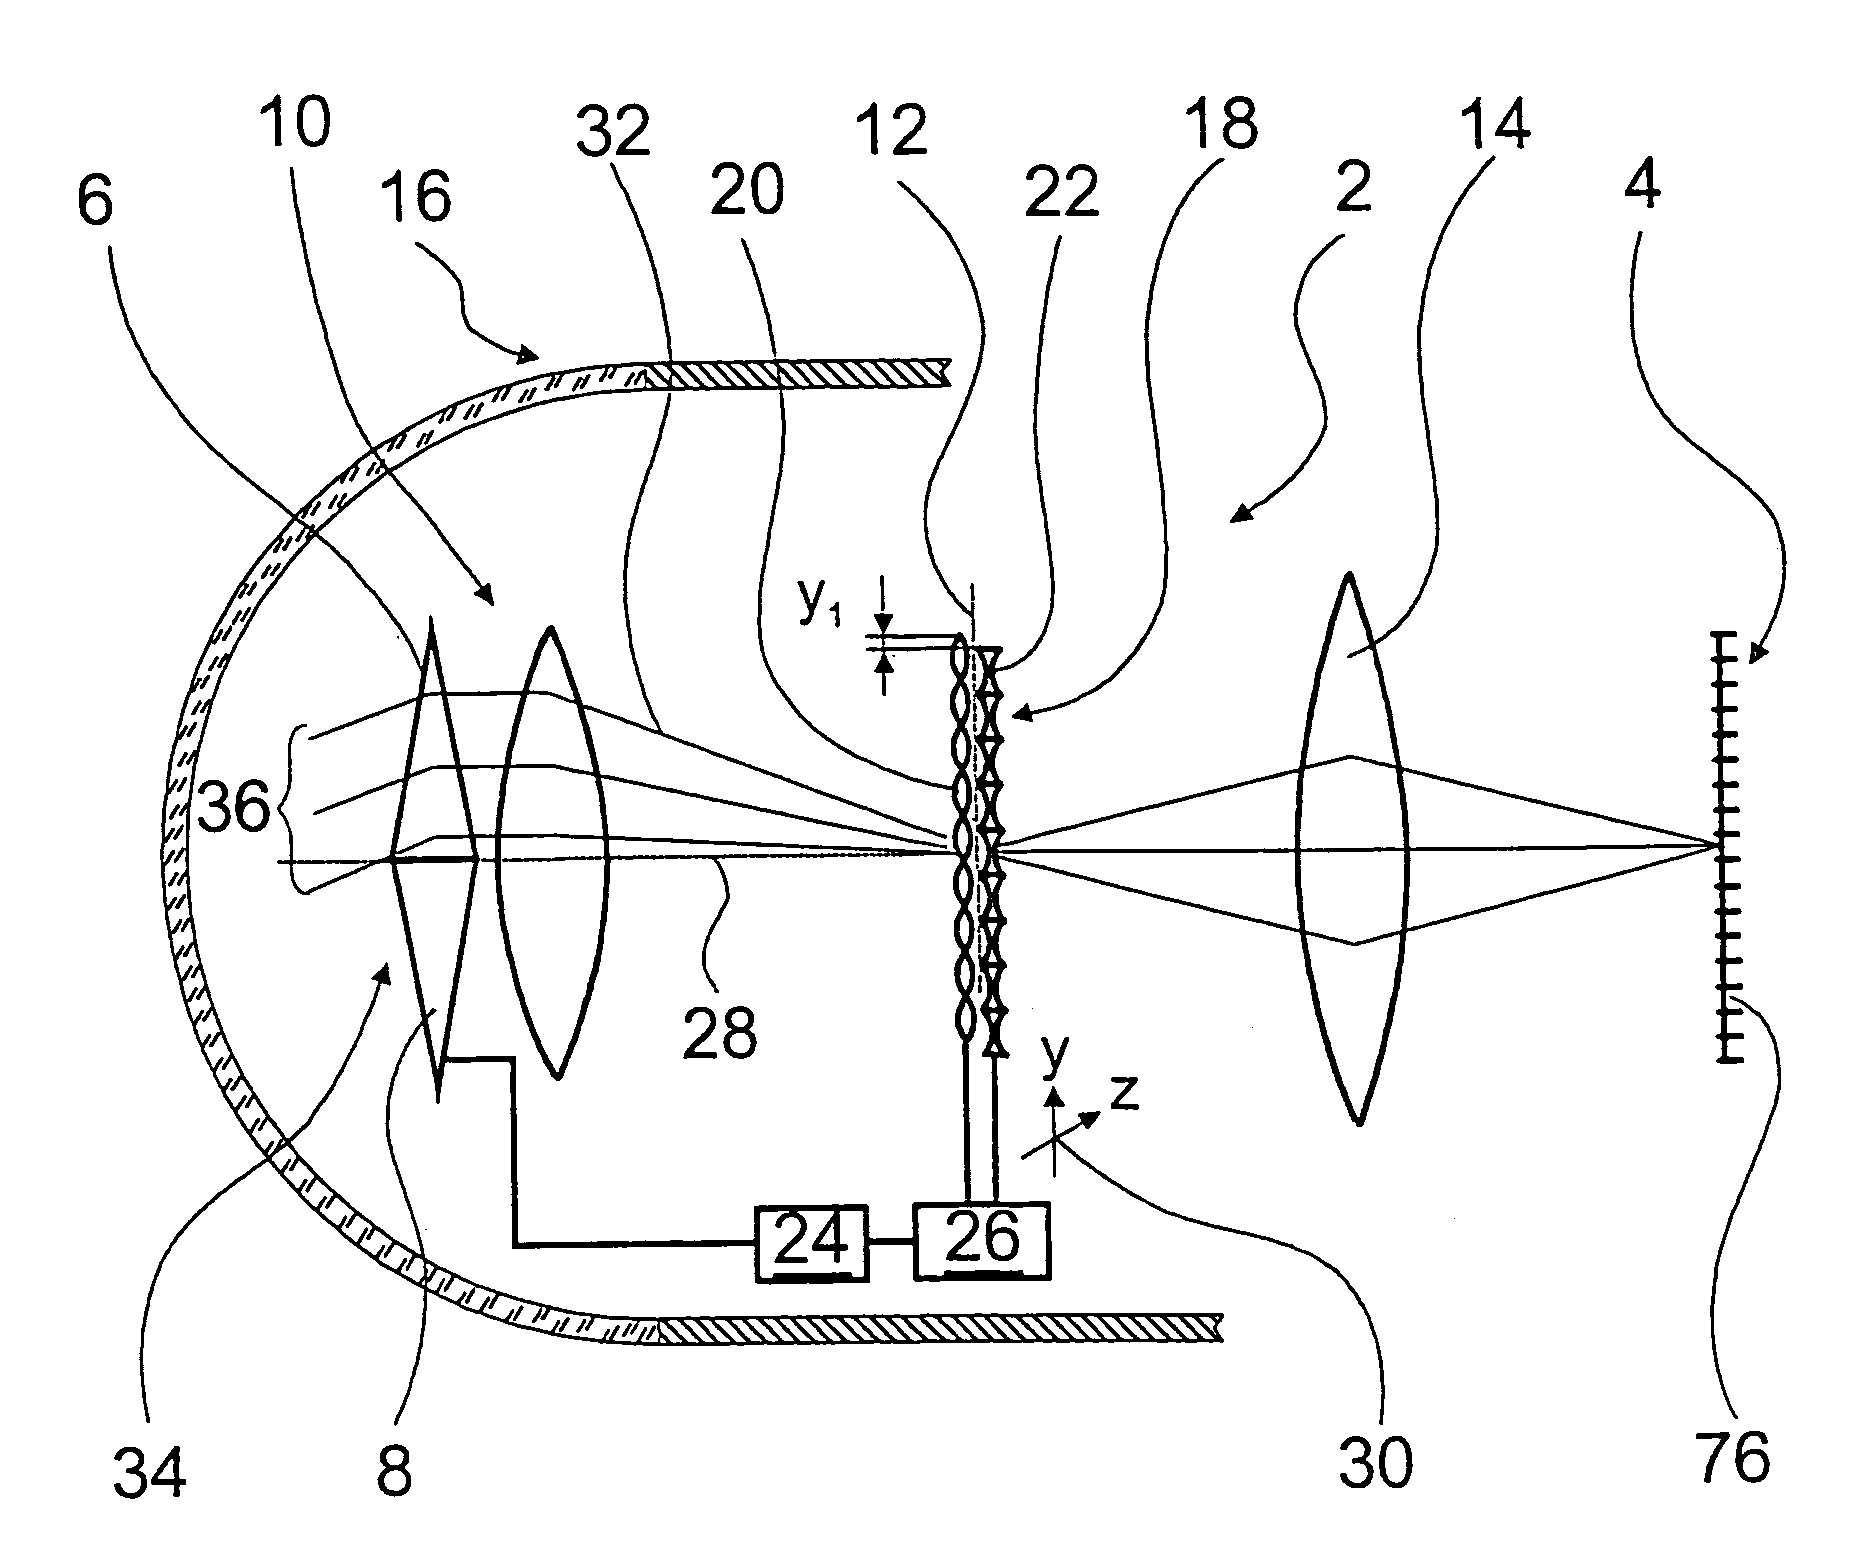 Optical arrangement for a homing head with movable optical elements